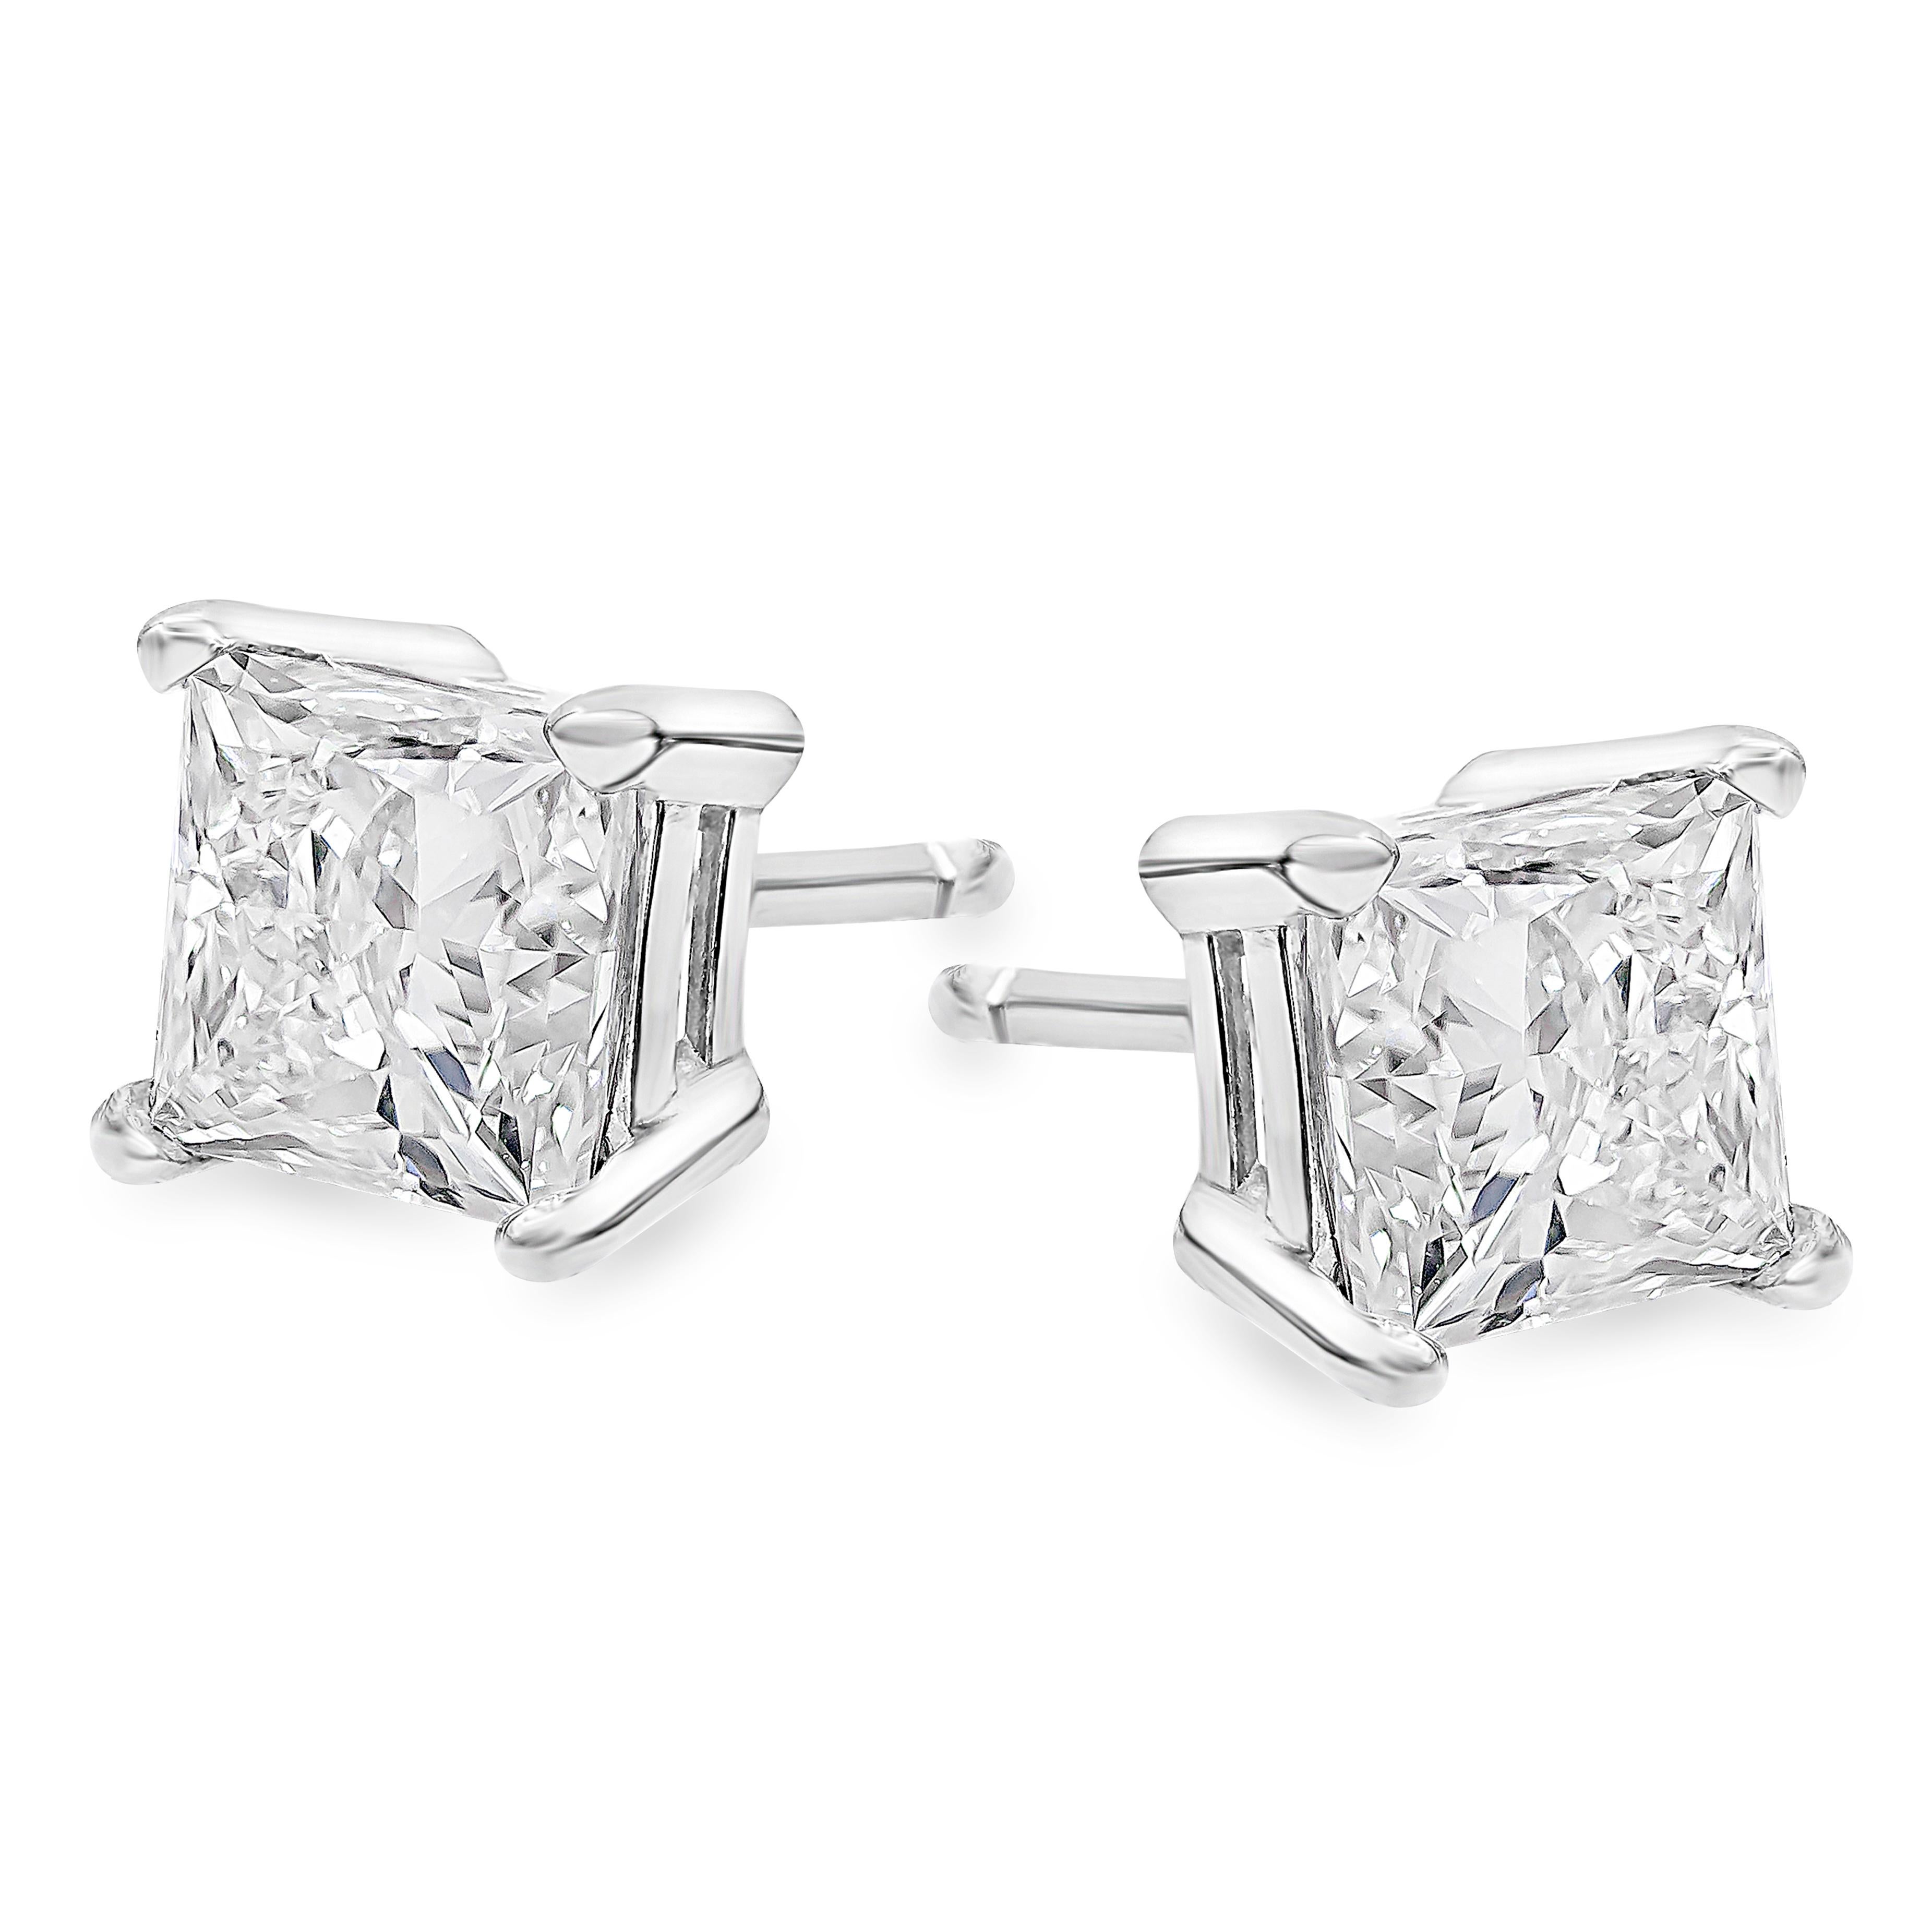 Contemporary 1.04 Carats Total Princess Cut Diamond Stud Earrings in White Gold For Sale